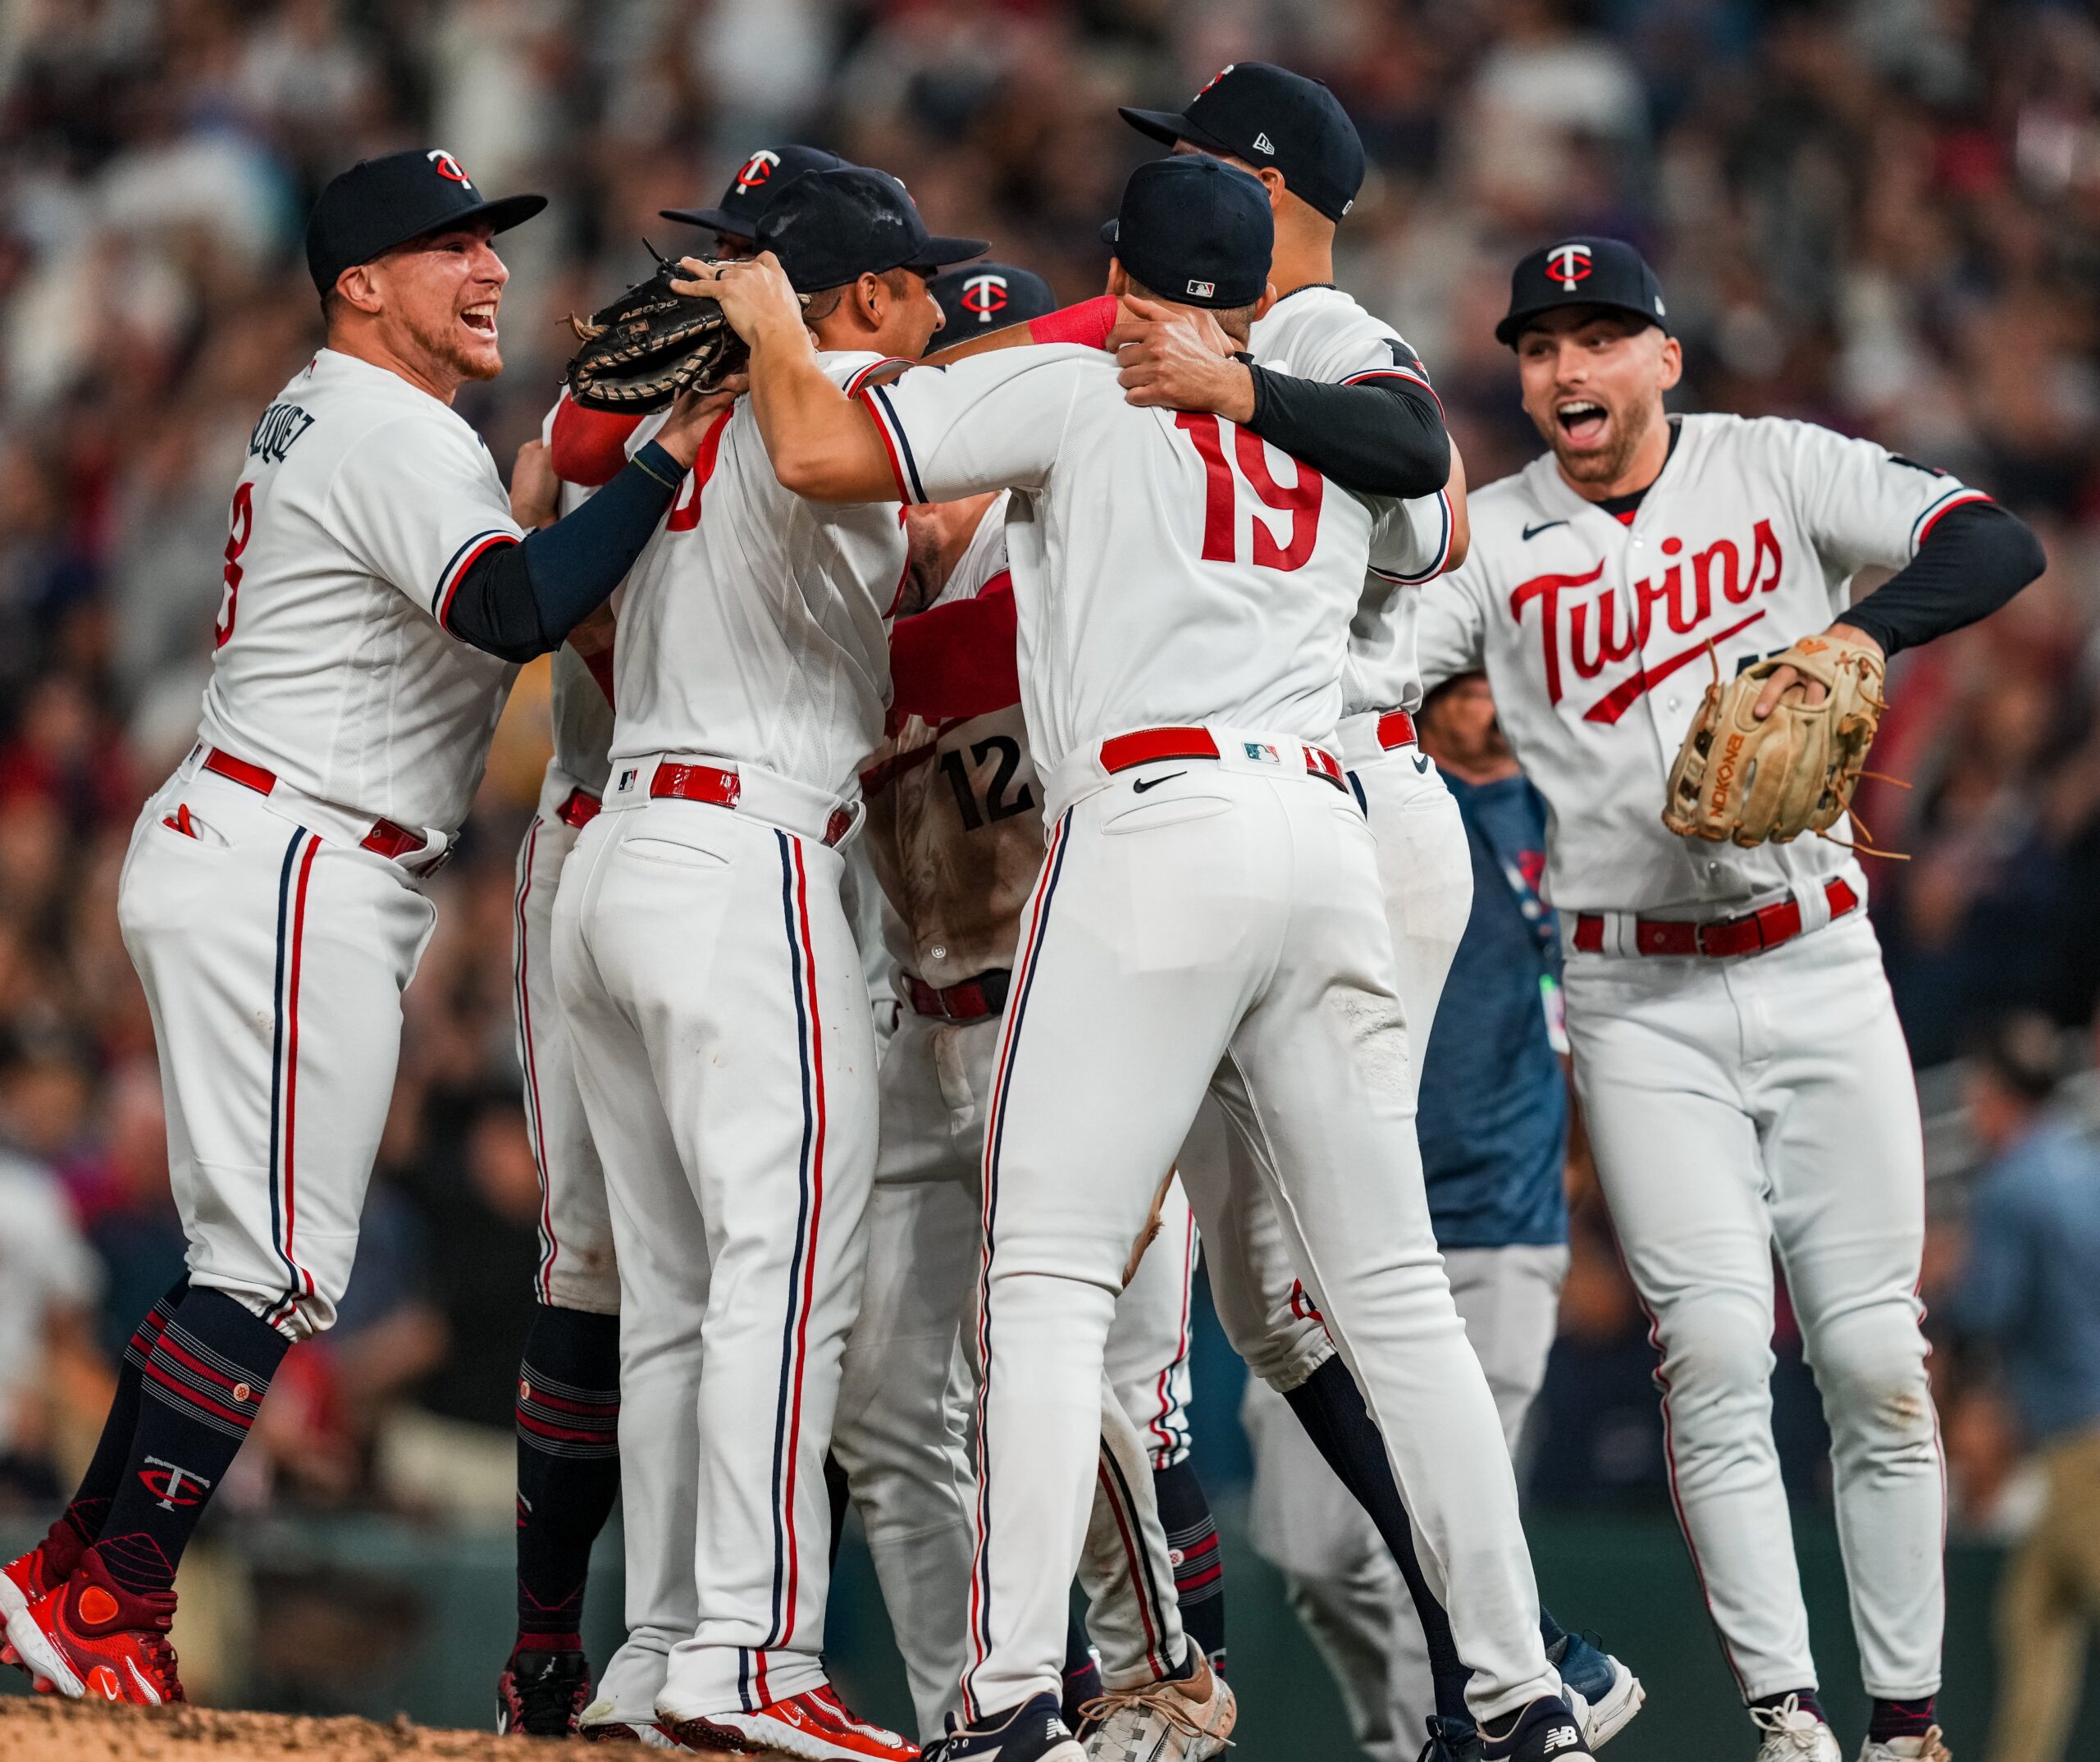 MLB playoffs: Twins win 2-0, eliminate Blue Jays in wild-card series sweep